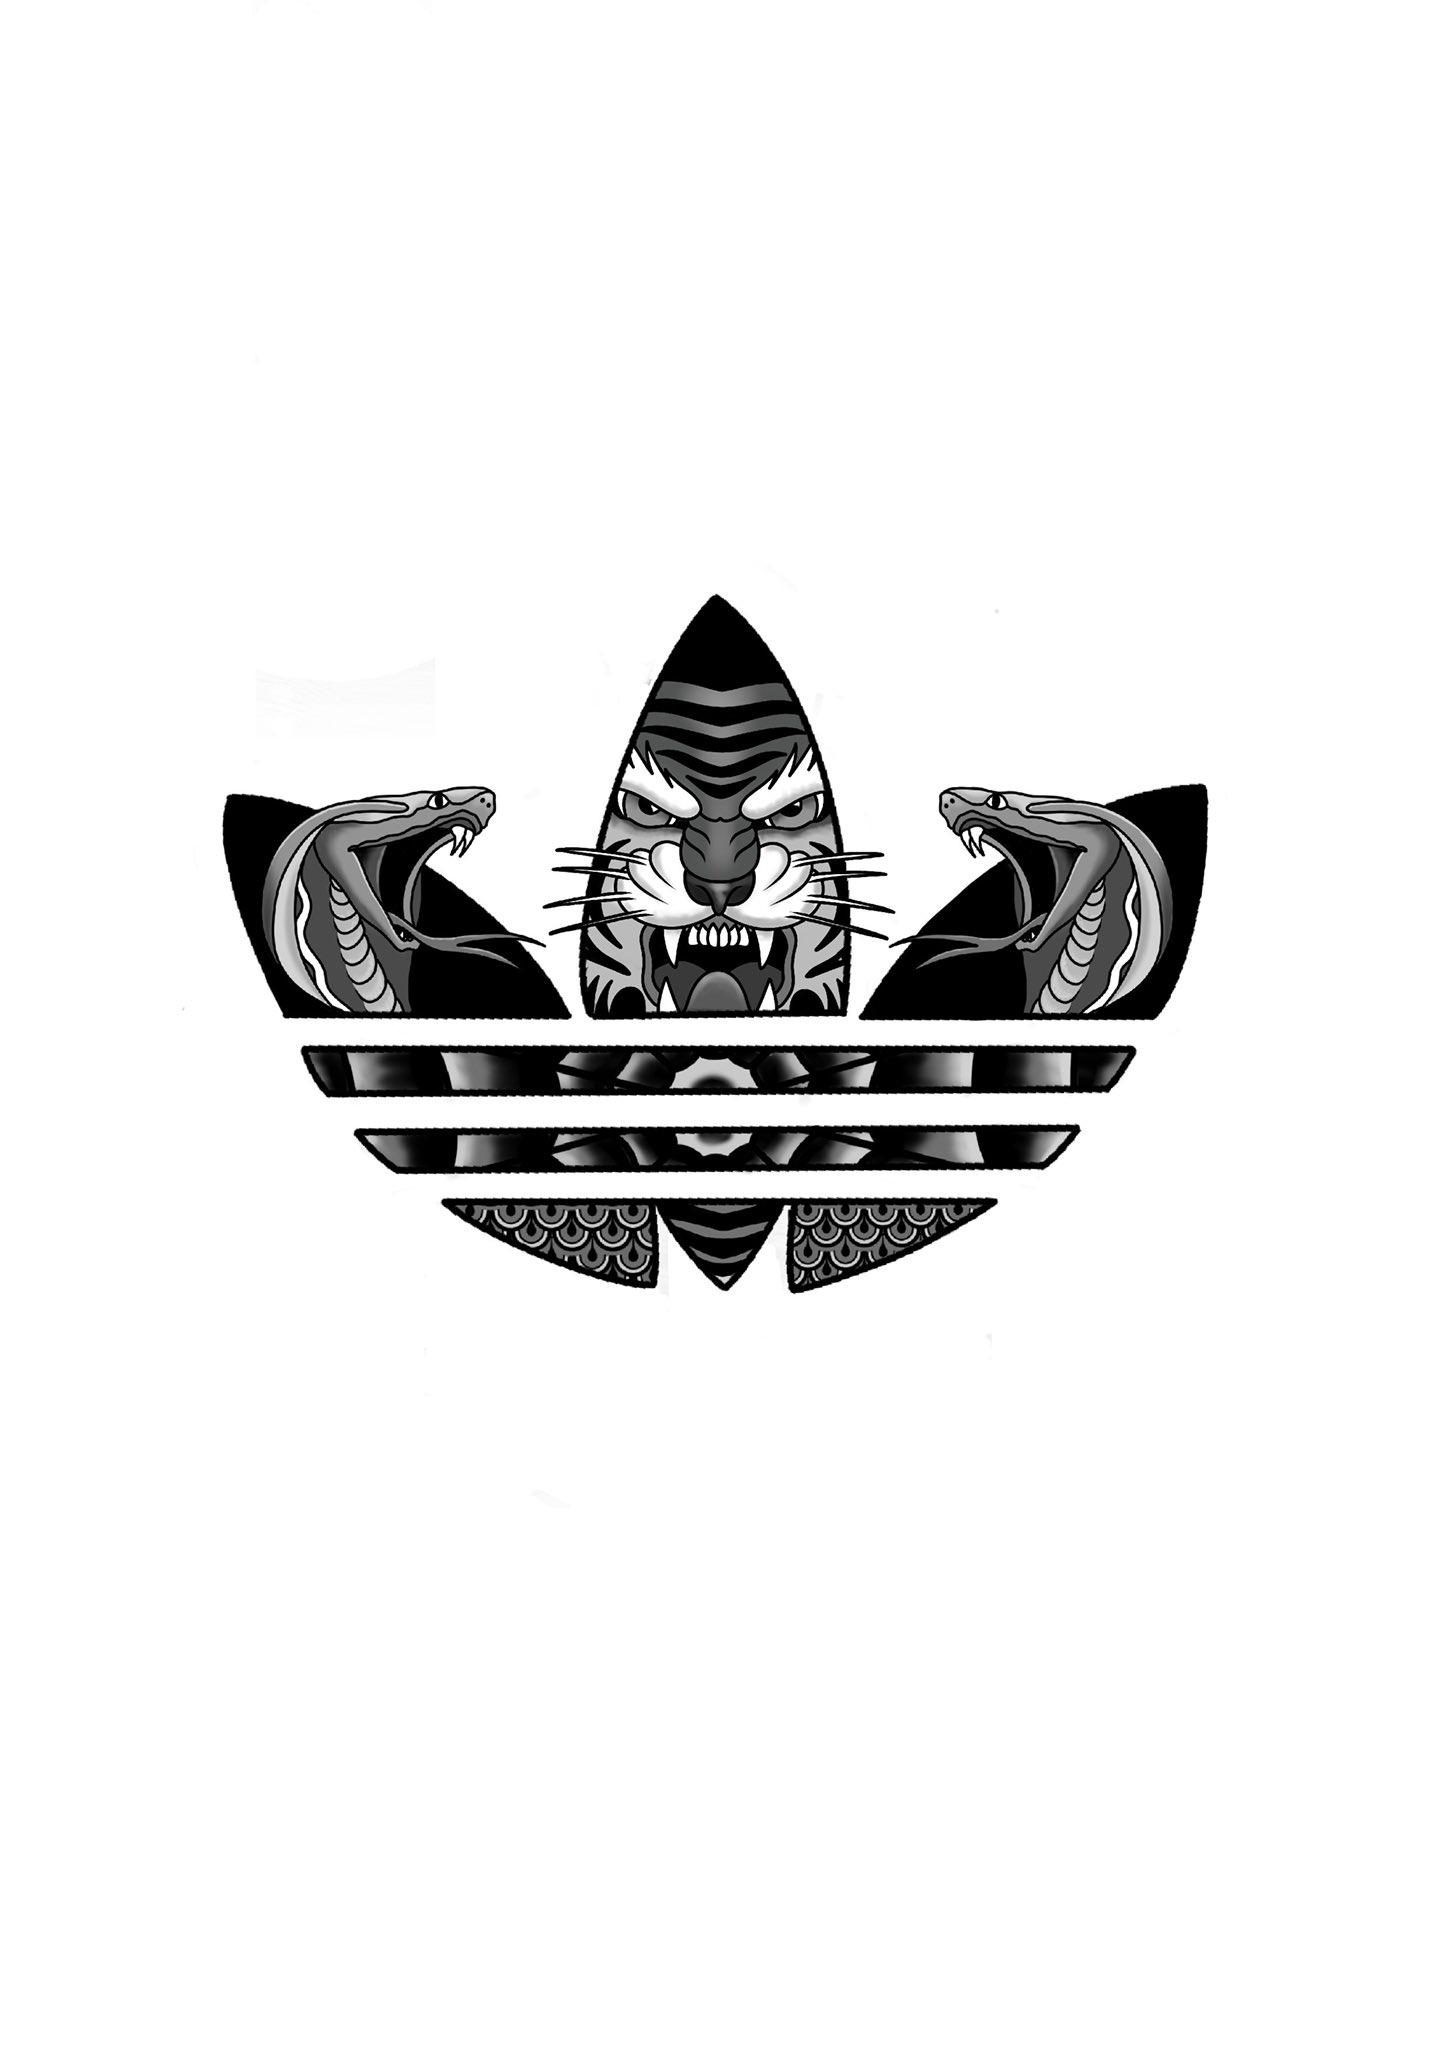 adidastattoo - Twitter Search / Twitter